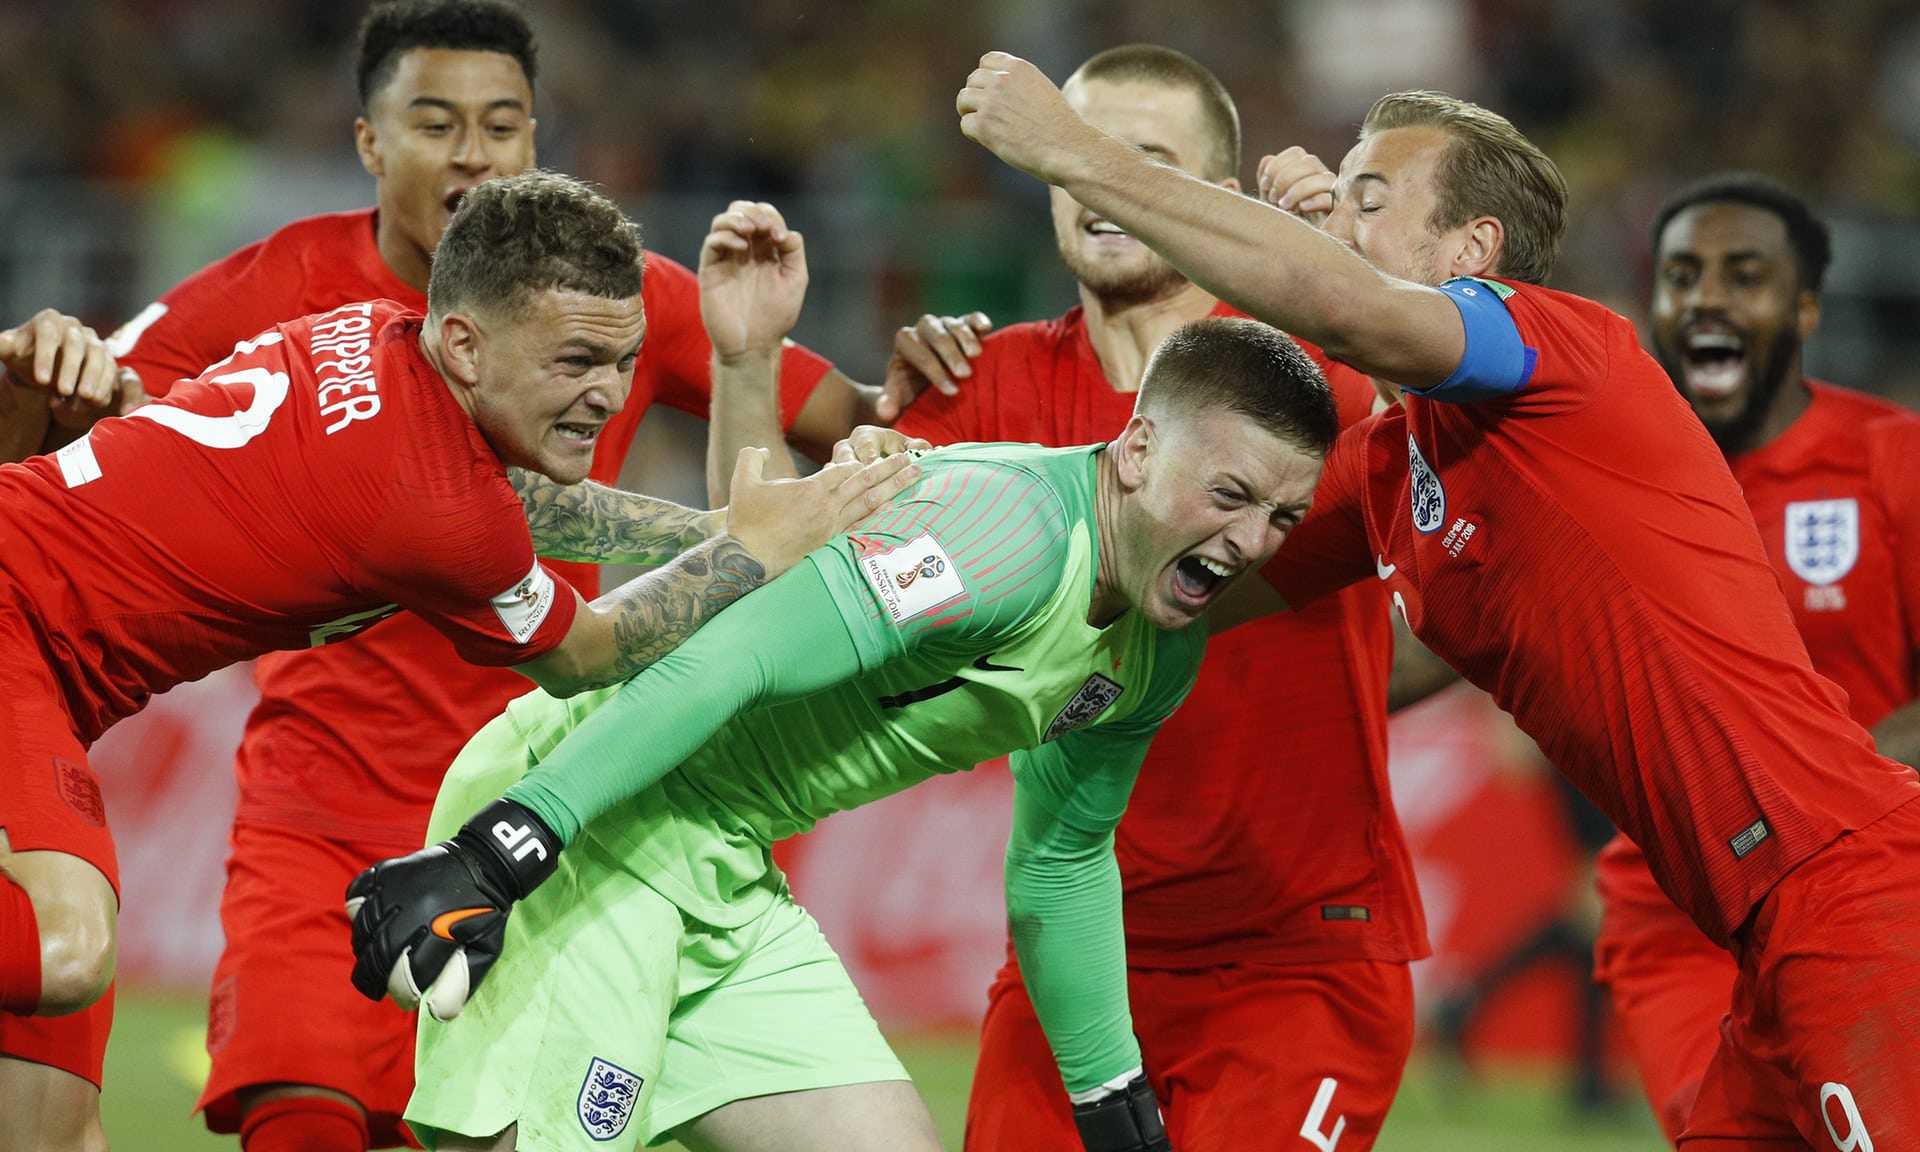 England Gets Past Colombia in World Cup Shootout, Sweden Beats Switzerland